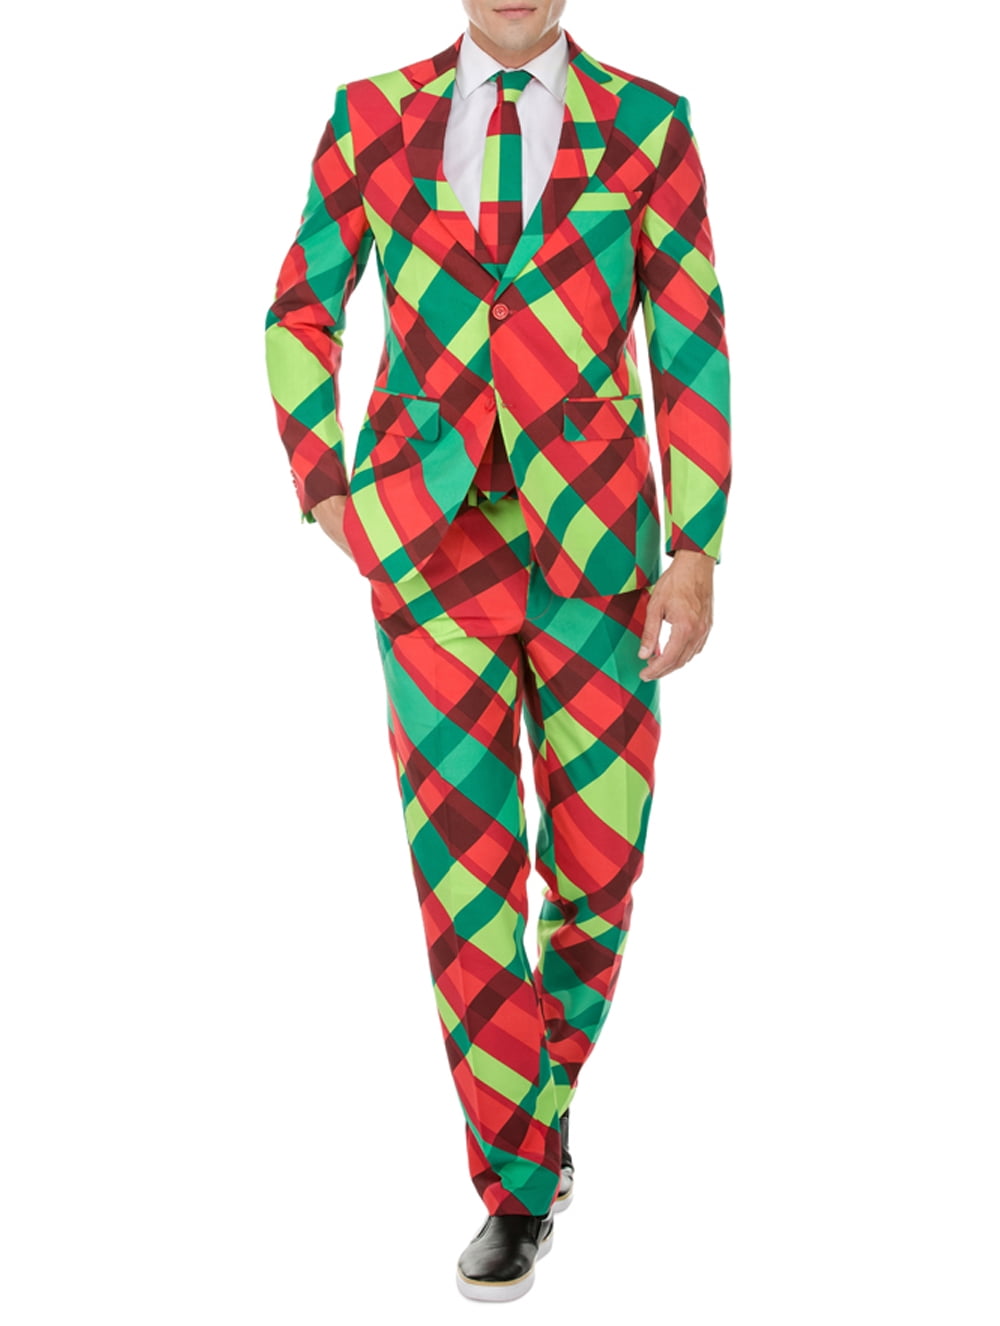 Santa Elves Green Ugly Xmas Sweater Costumes Include Jacket Pants & Tie Suitmeister Christmas Suits for Men